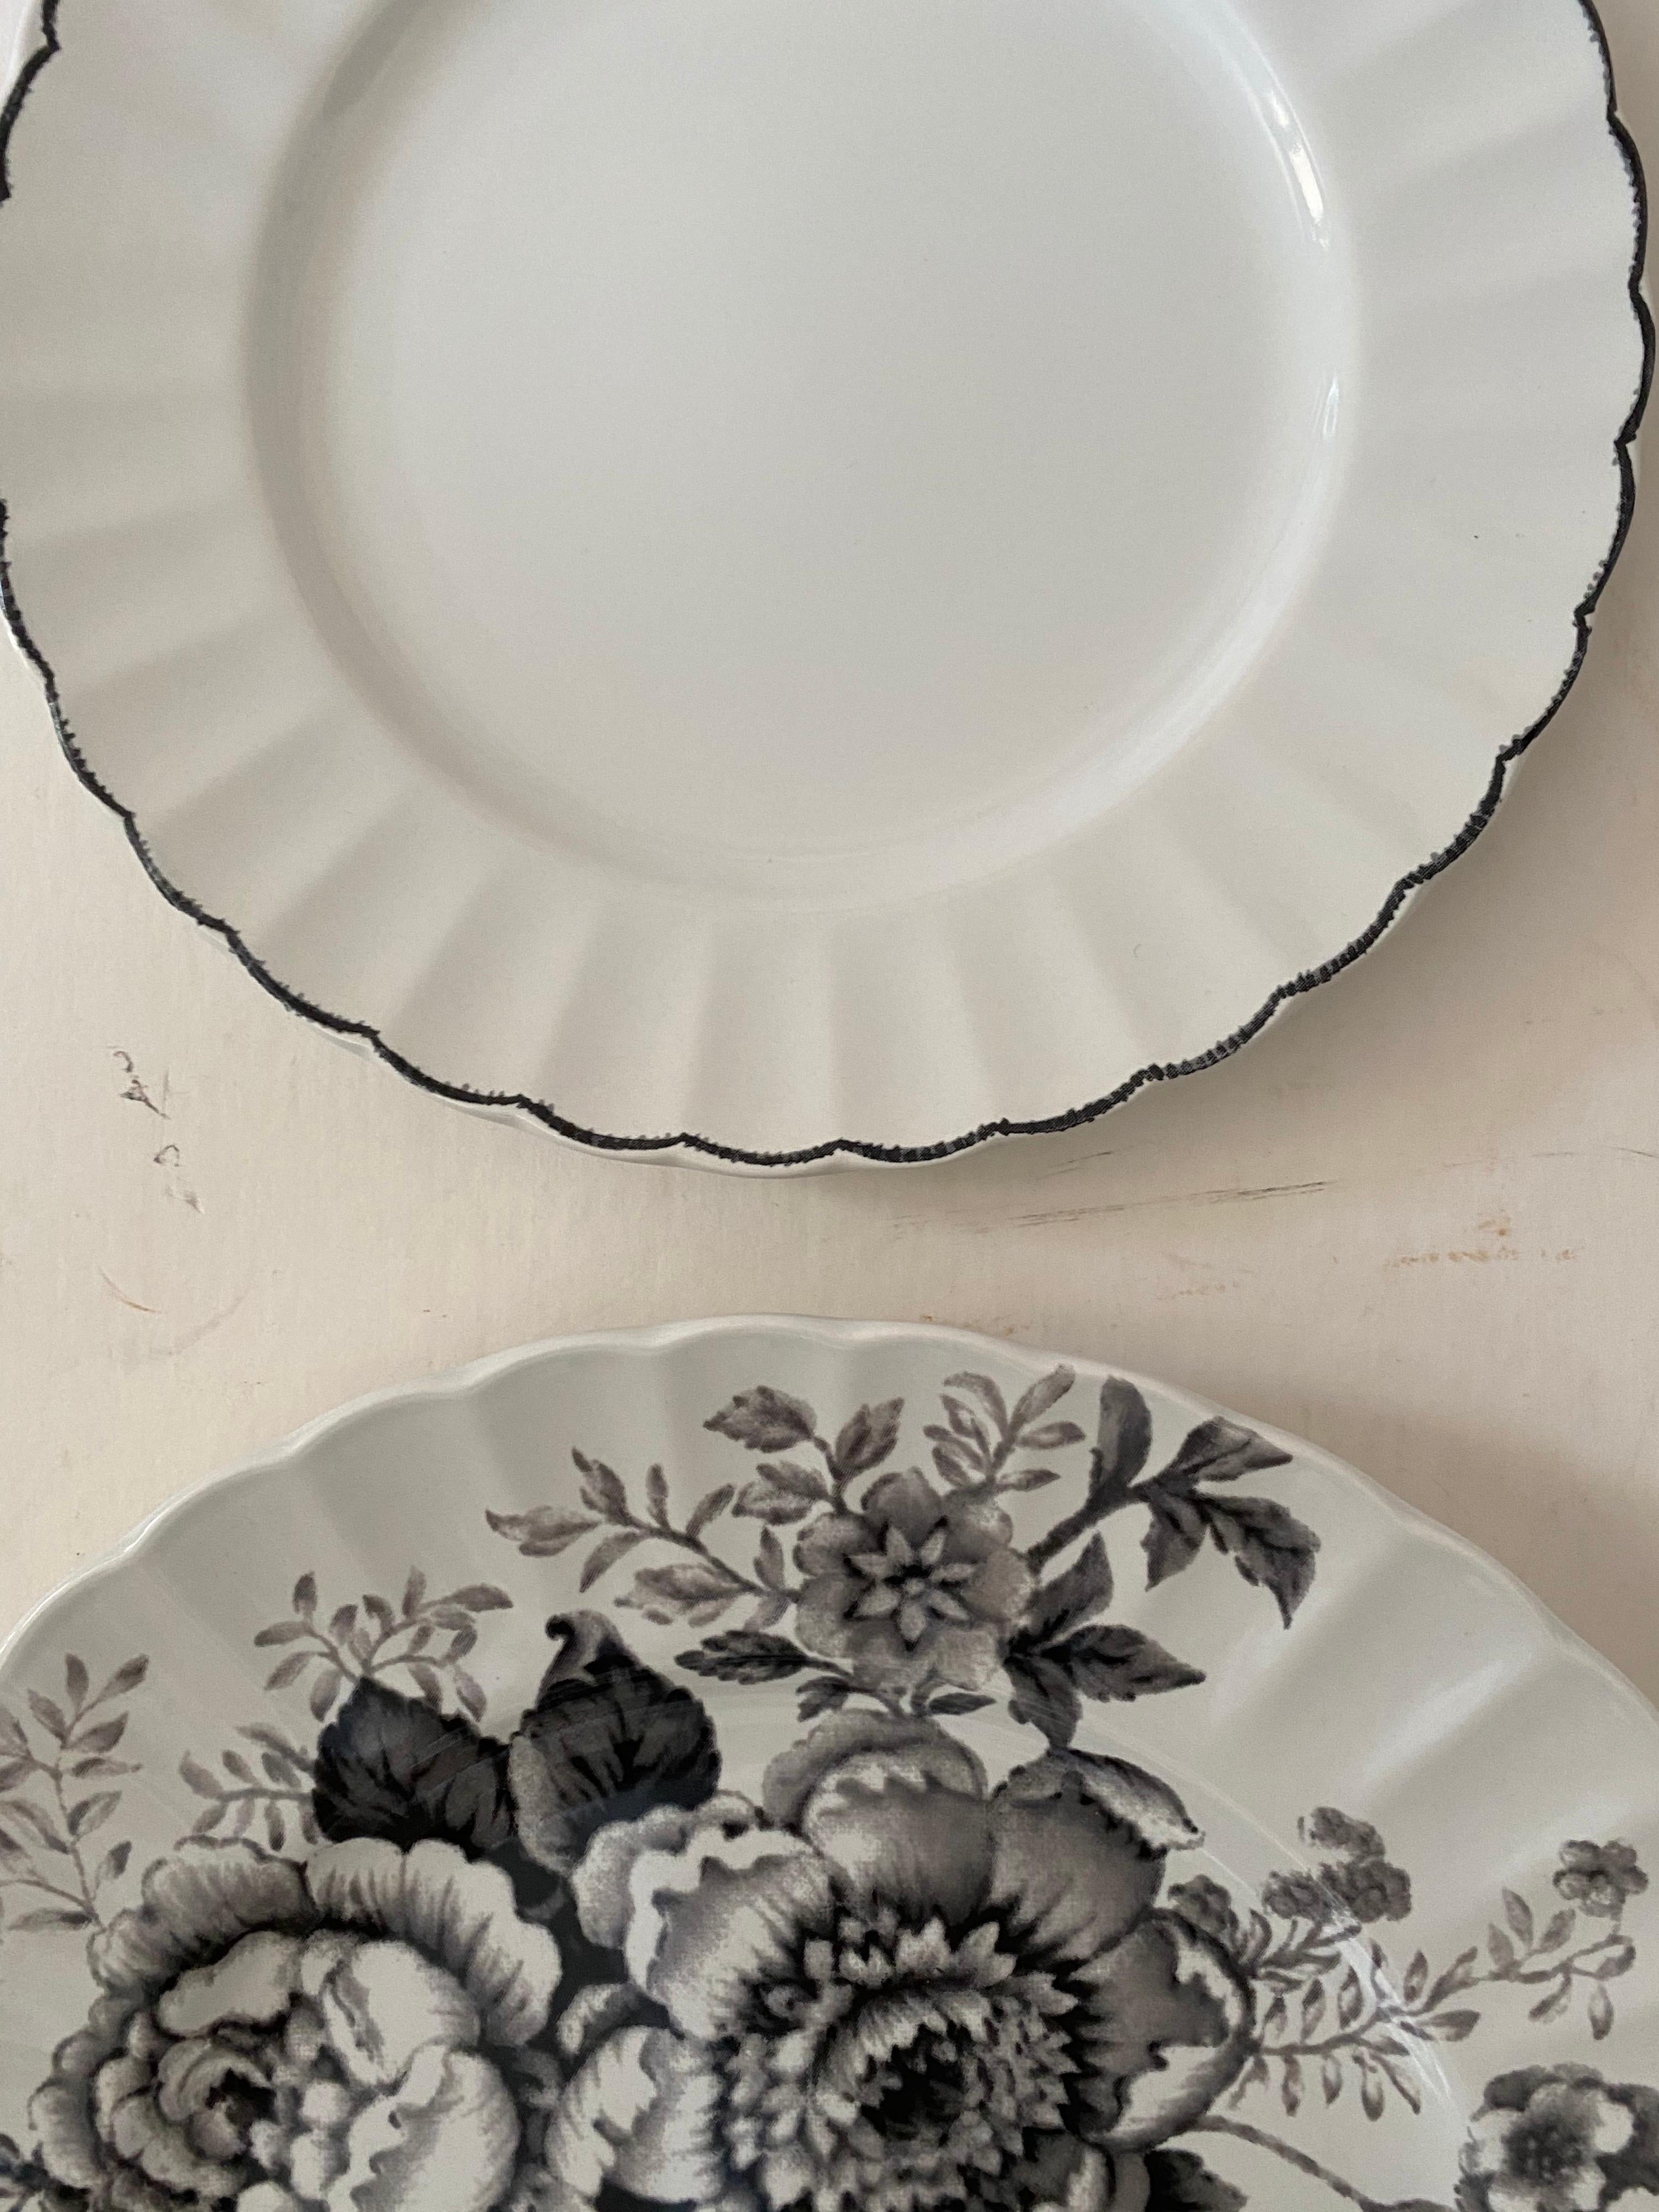 A Lauren by Ralph Lauren 16 piece dinnerware set in the complementary Morning Garden and Featherstitch Black patterns. Featuring a classic design in clean black on white.

Imported, circa 2010.

Includes the following 16 pieces:
8 Dinner Plates